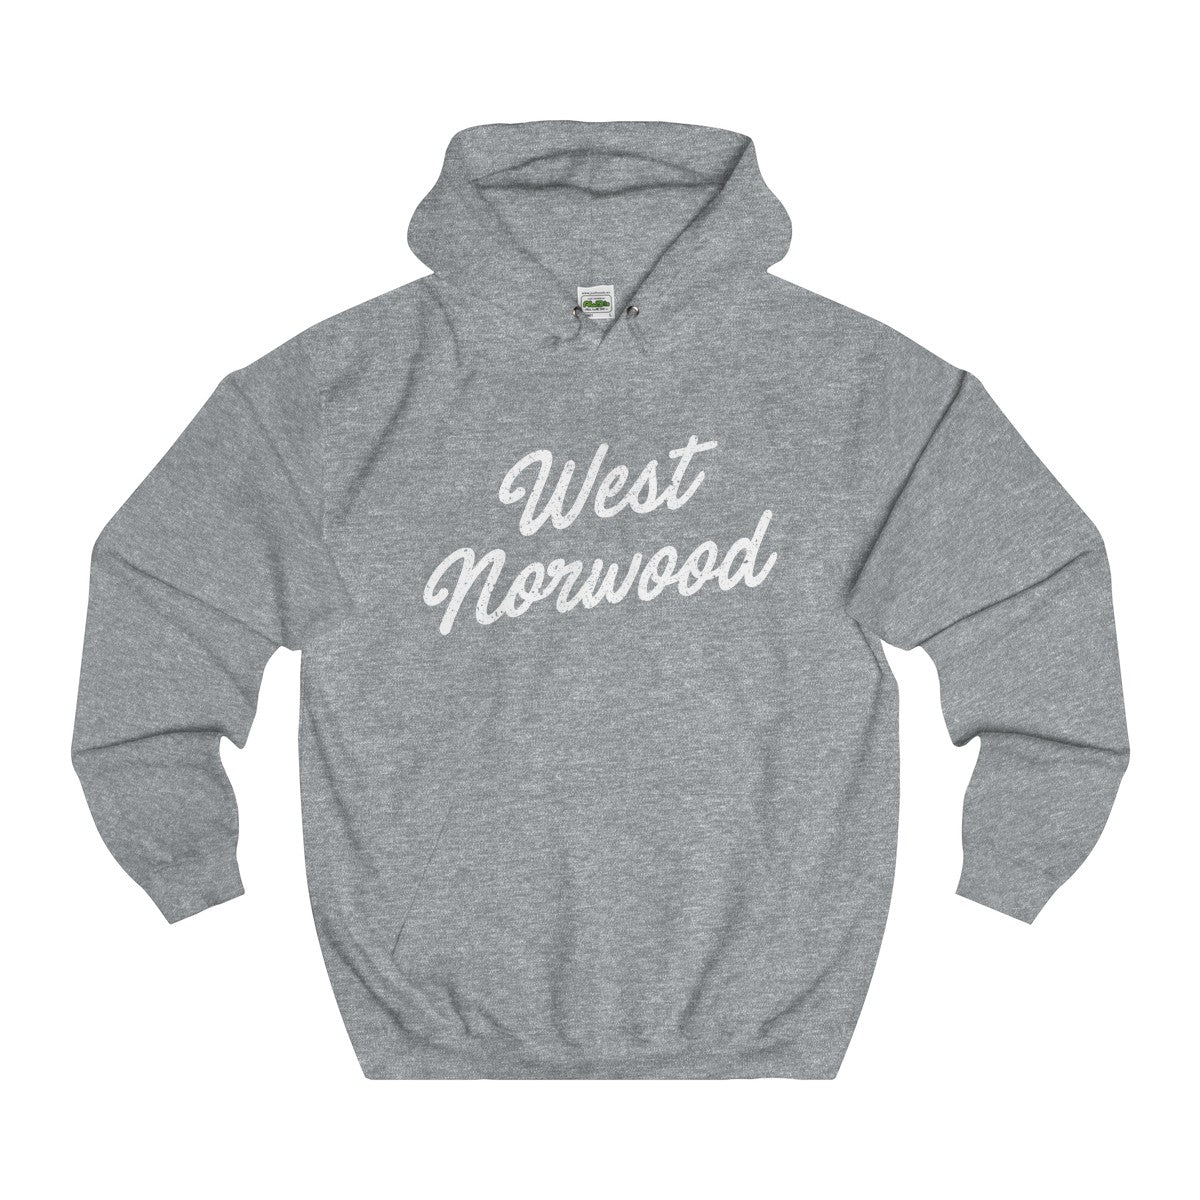 West Norwood Scripted Sweater